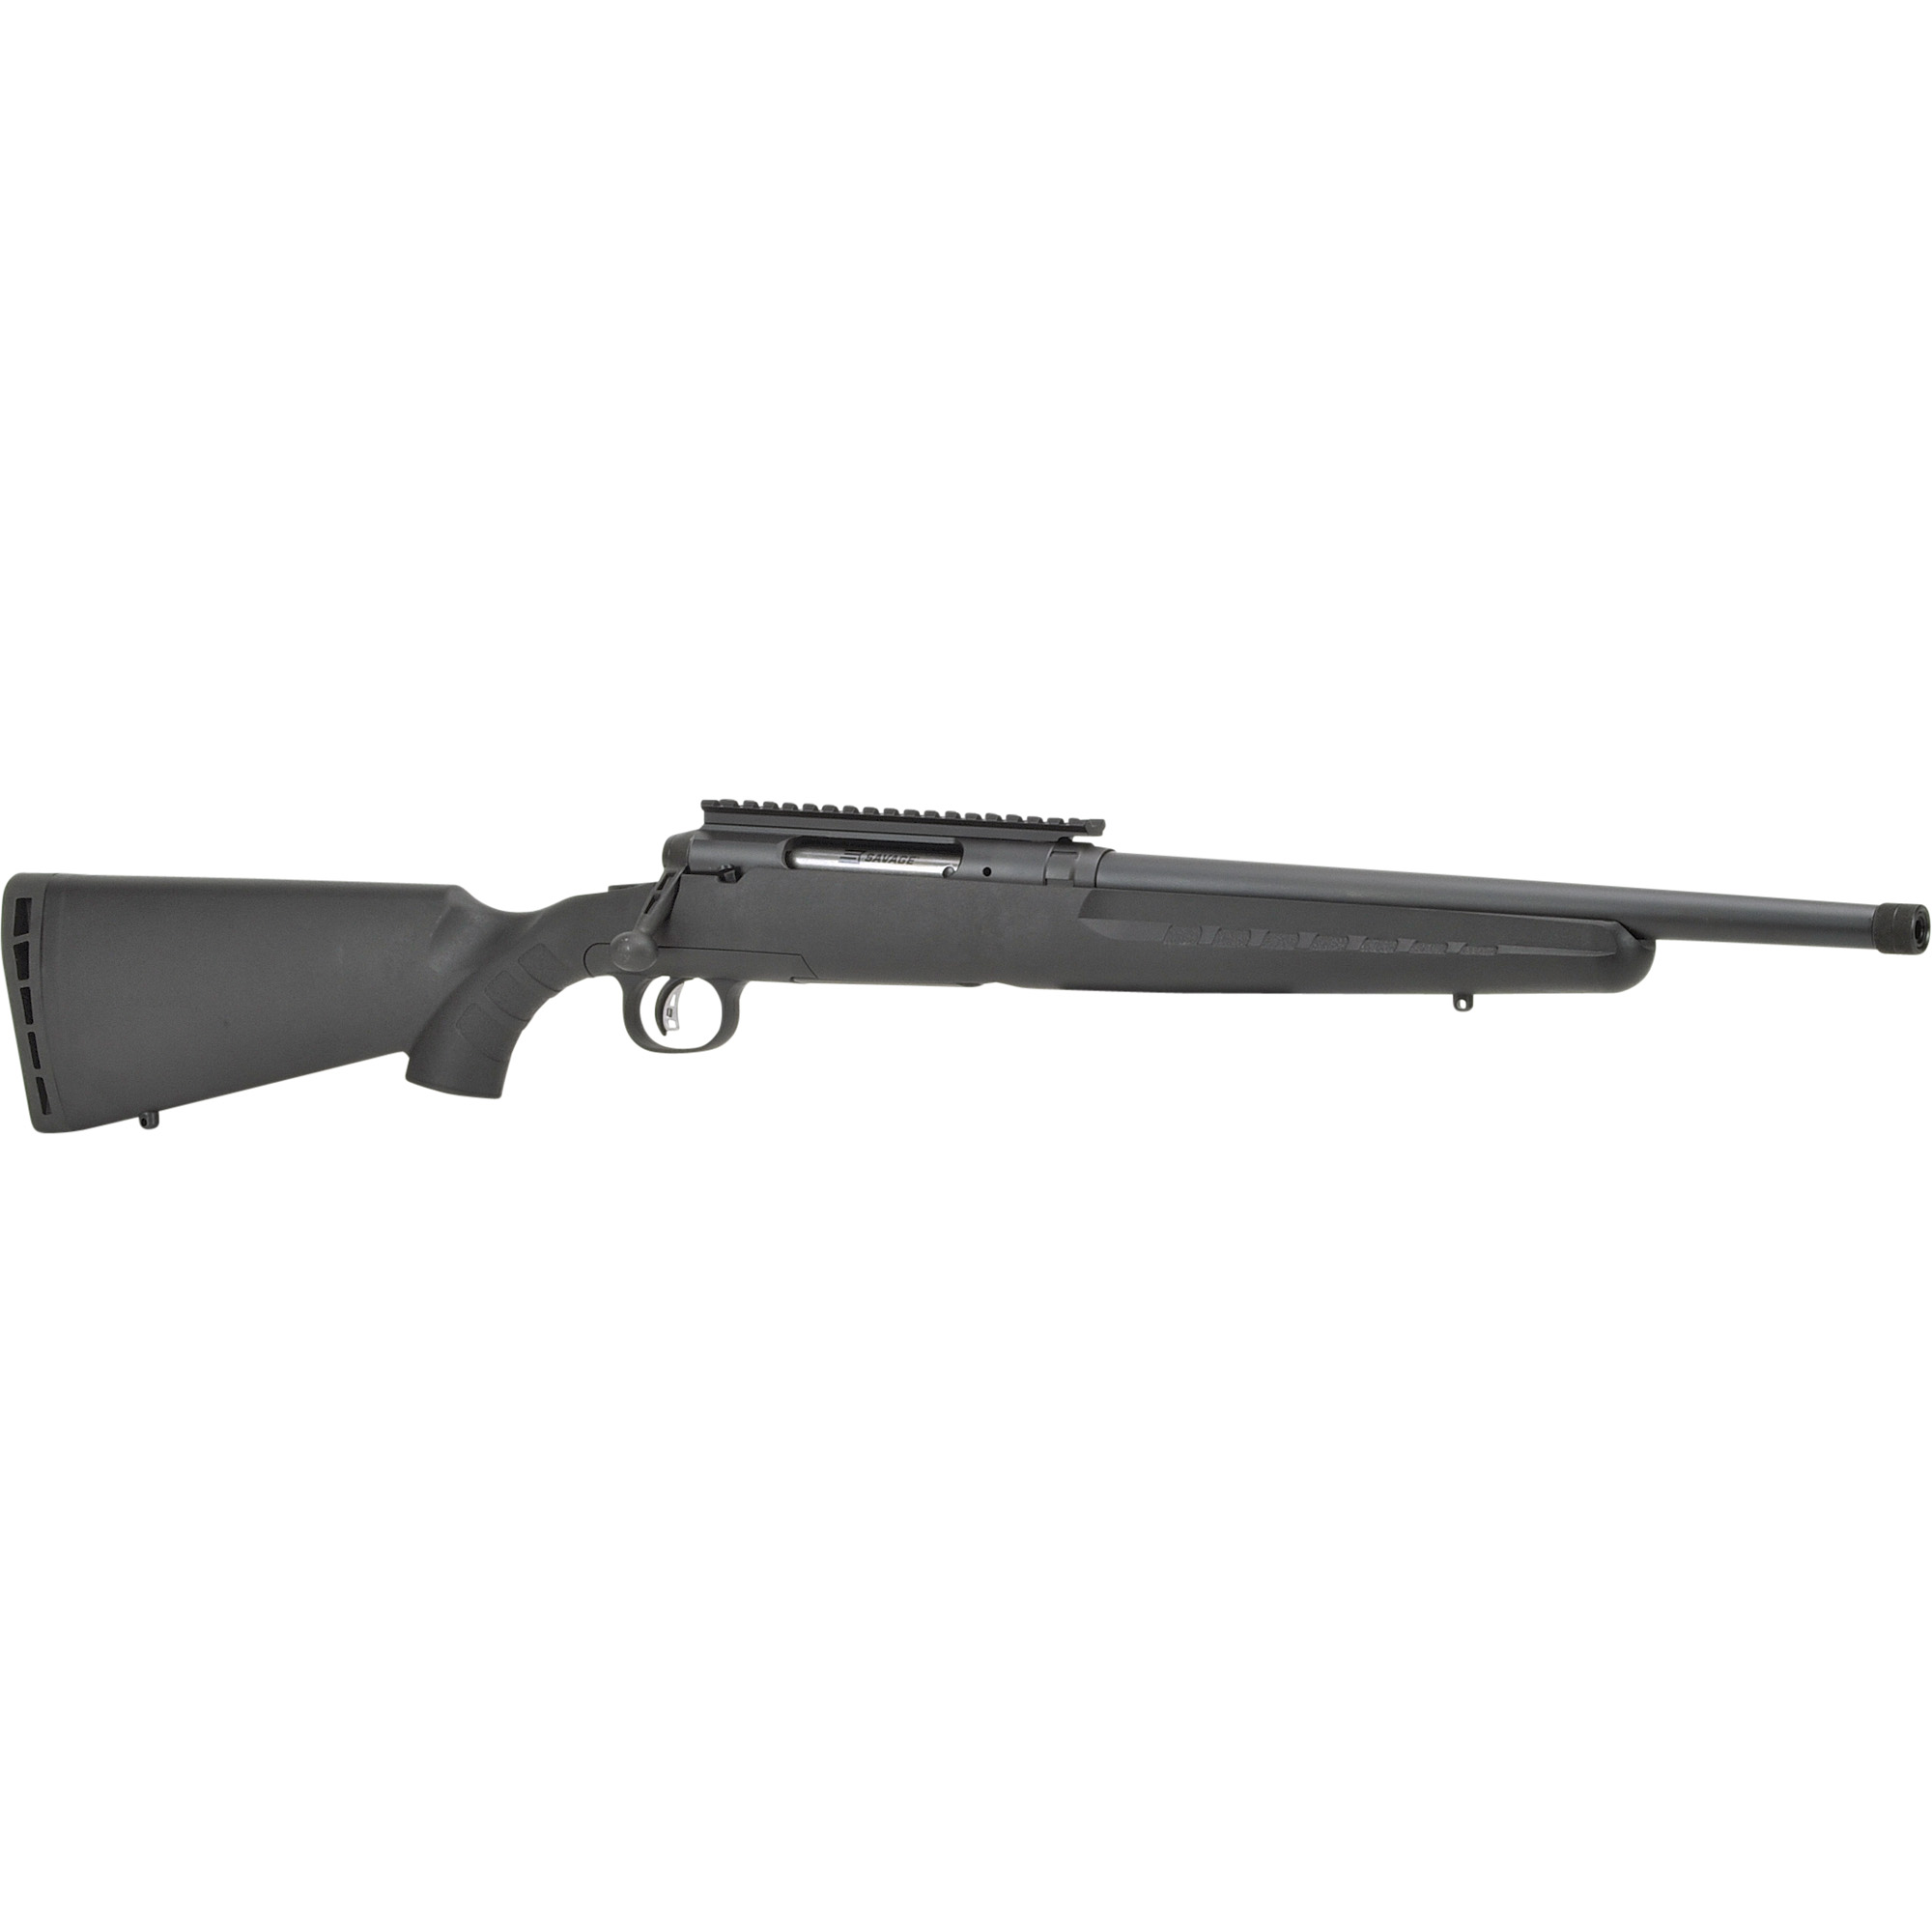 SAVAGE ARMS AXIS II 300BLK 16.125 4RD BLK